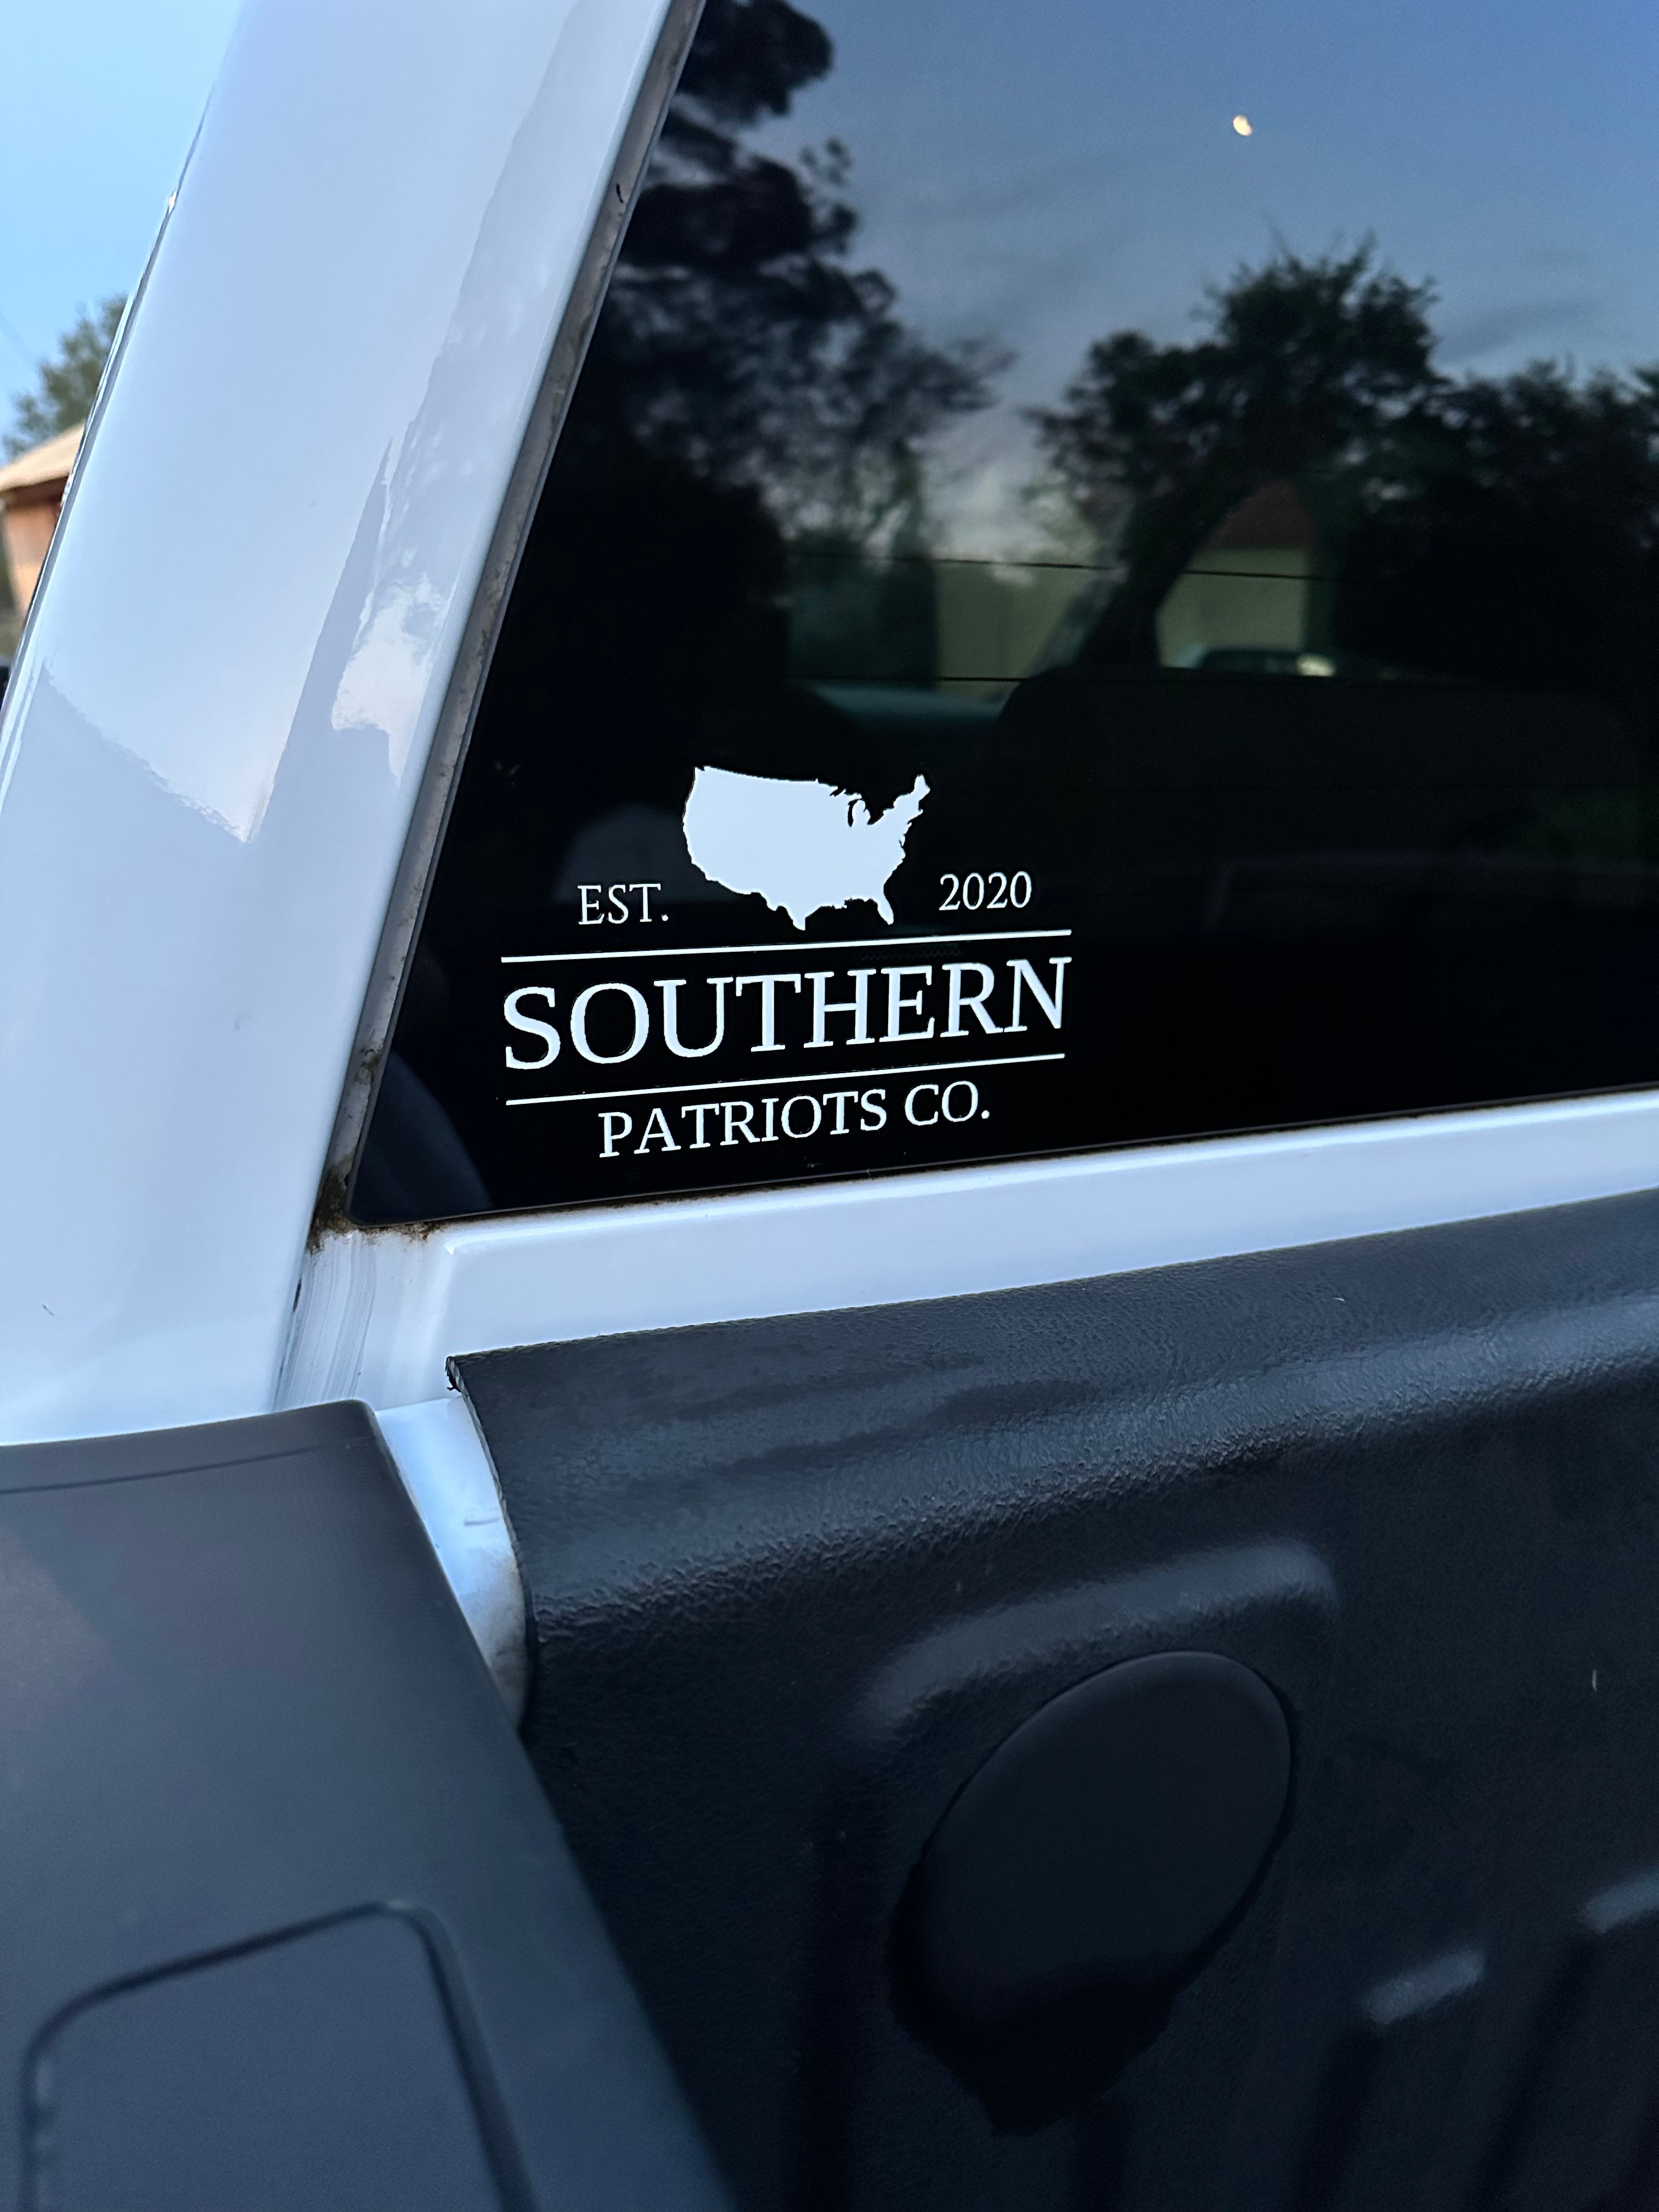 Southern Patriots Co. (@southernpatriotsco) • Instagram photos and